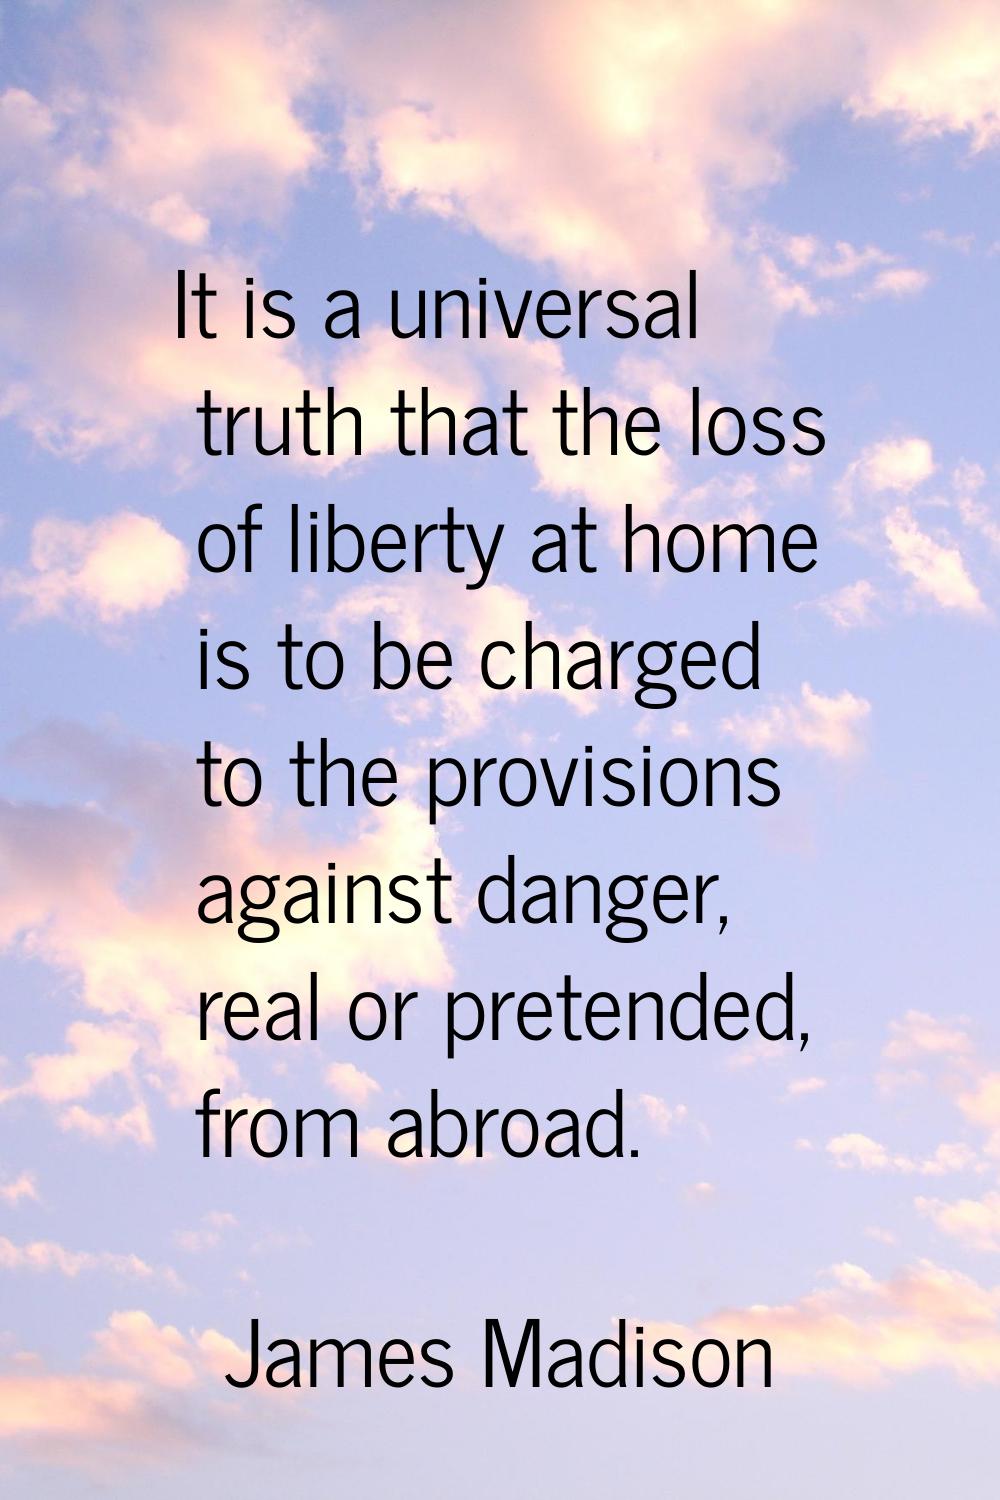 It is a universal truth that the loss of liberty at home is to be charged to the provisions against